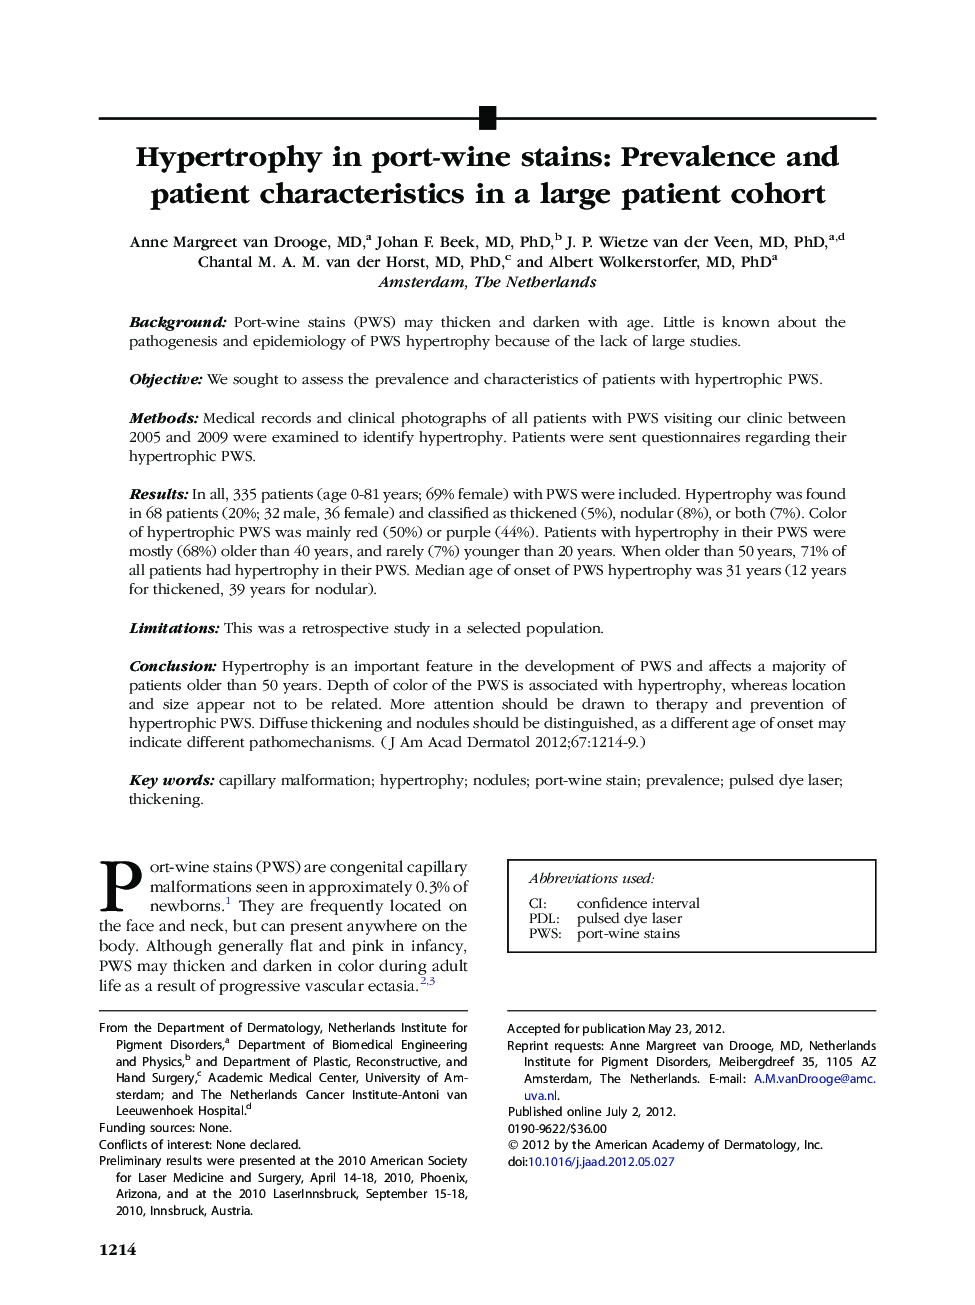 Hypertrophy in port-wine stains: Prevalence and patient characteristics in a large patient cohort 